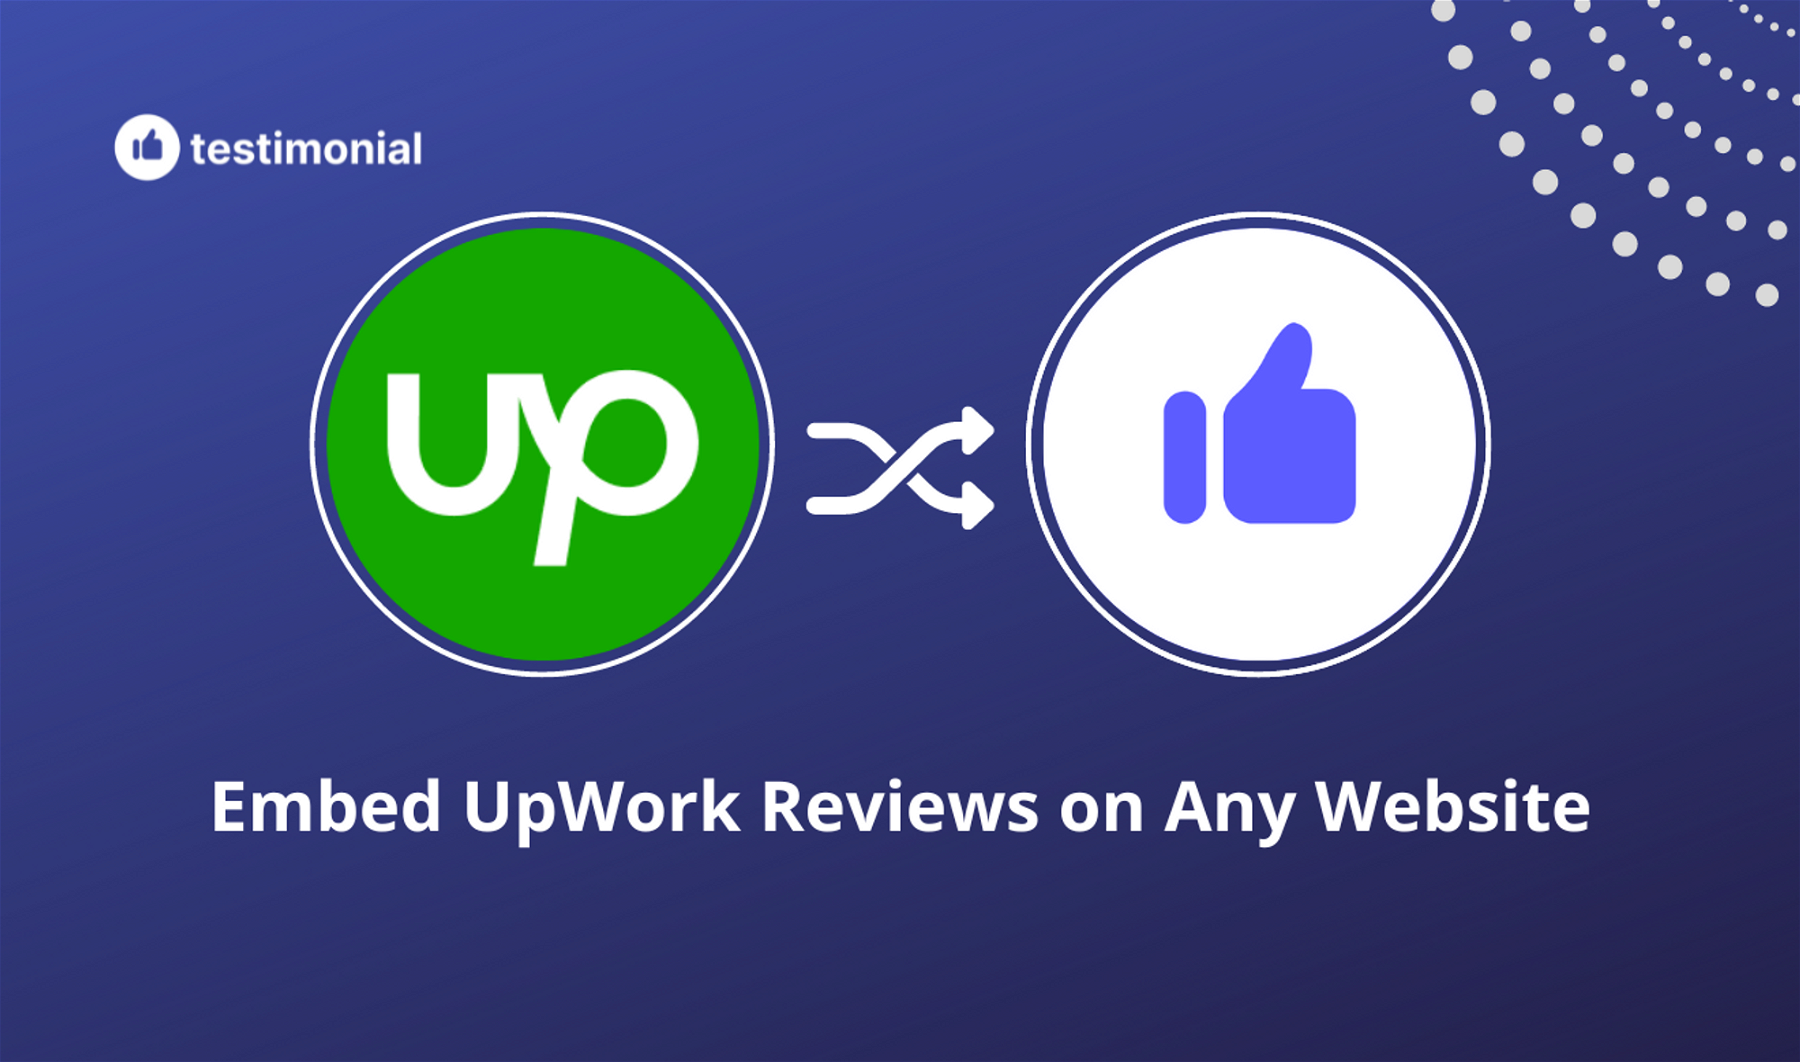 How to embed UpWork Reviews on Your Website